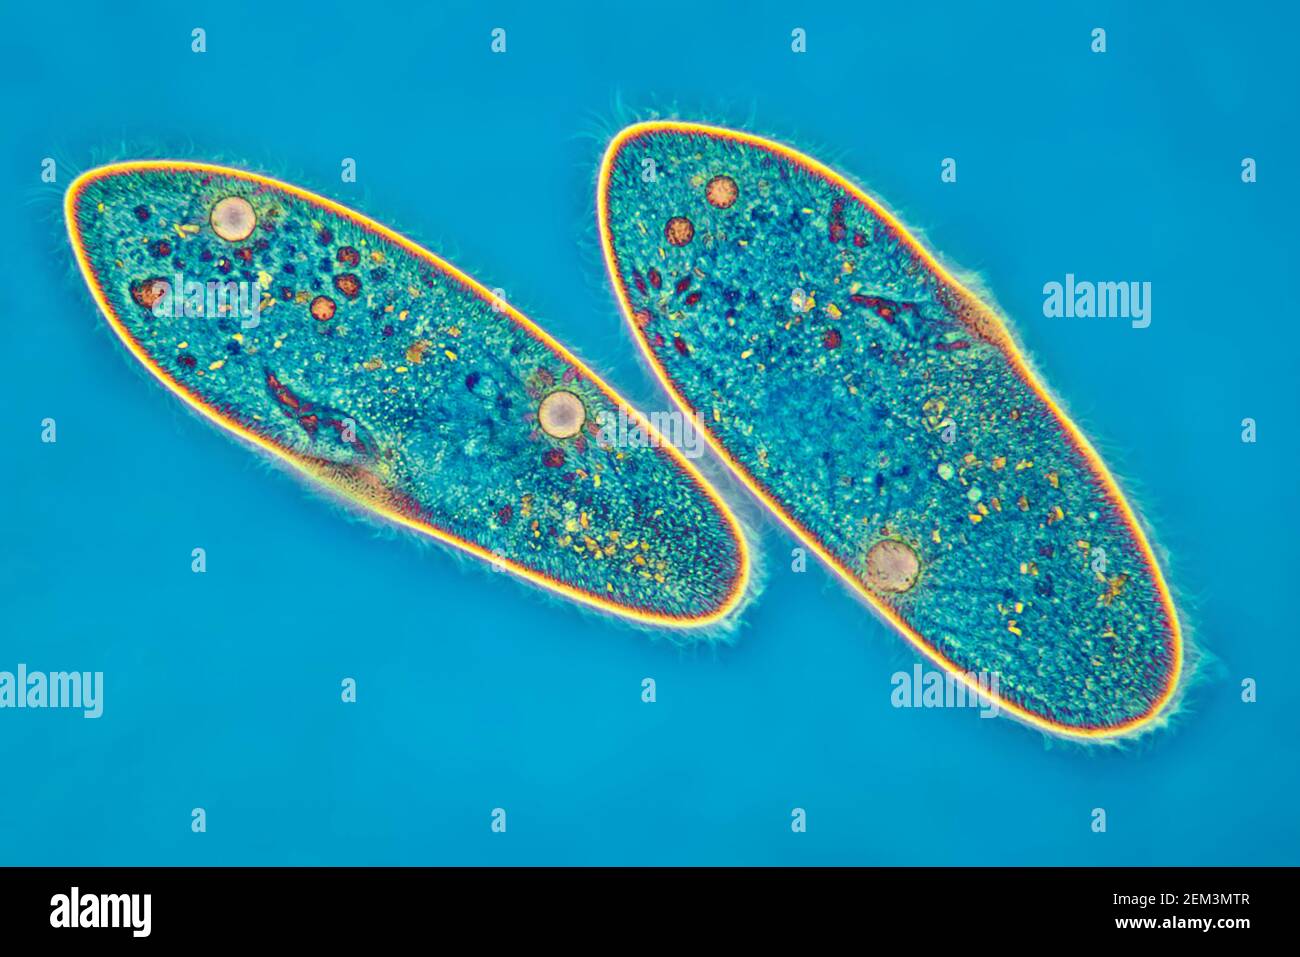 slipper animalcules (Paramecium caudatum), phase-contrast MRI image, magnification x80 related to 35mm, Germany Stock Photo